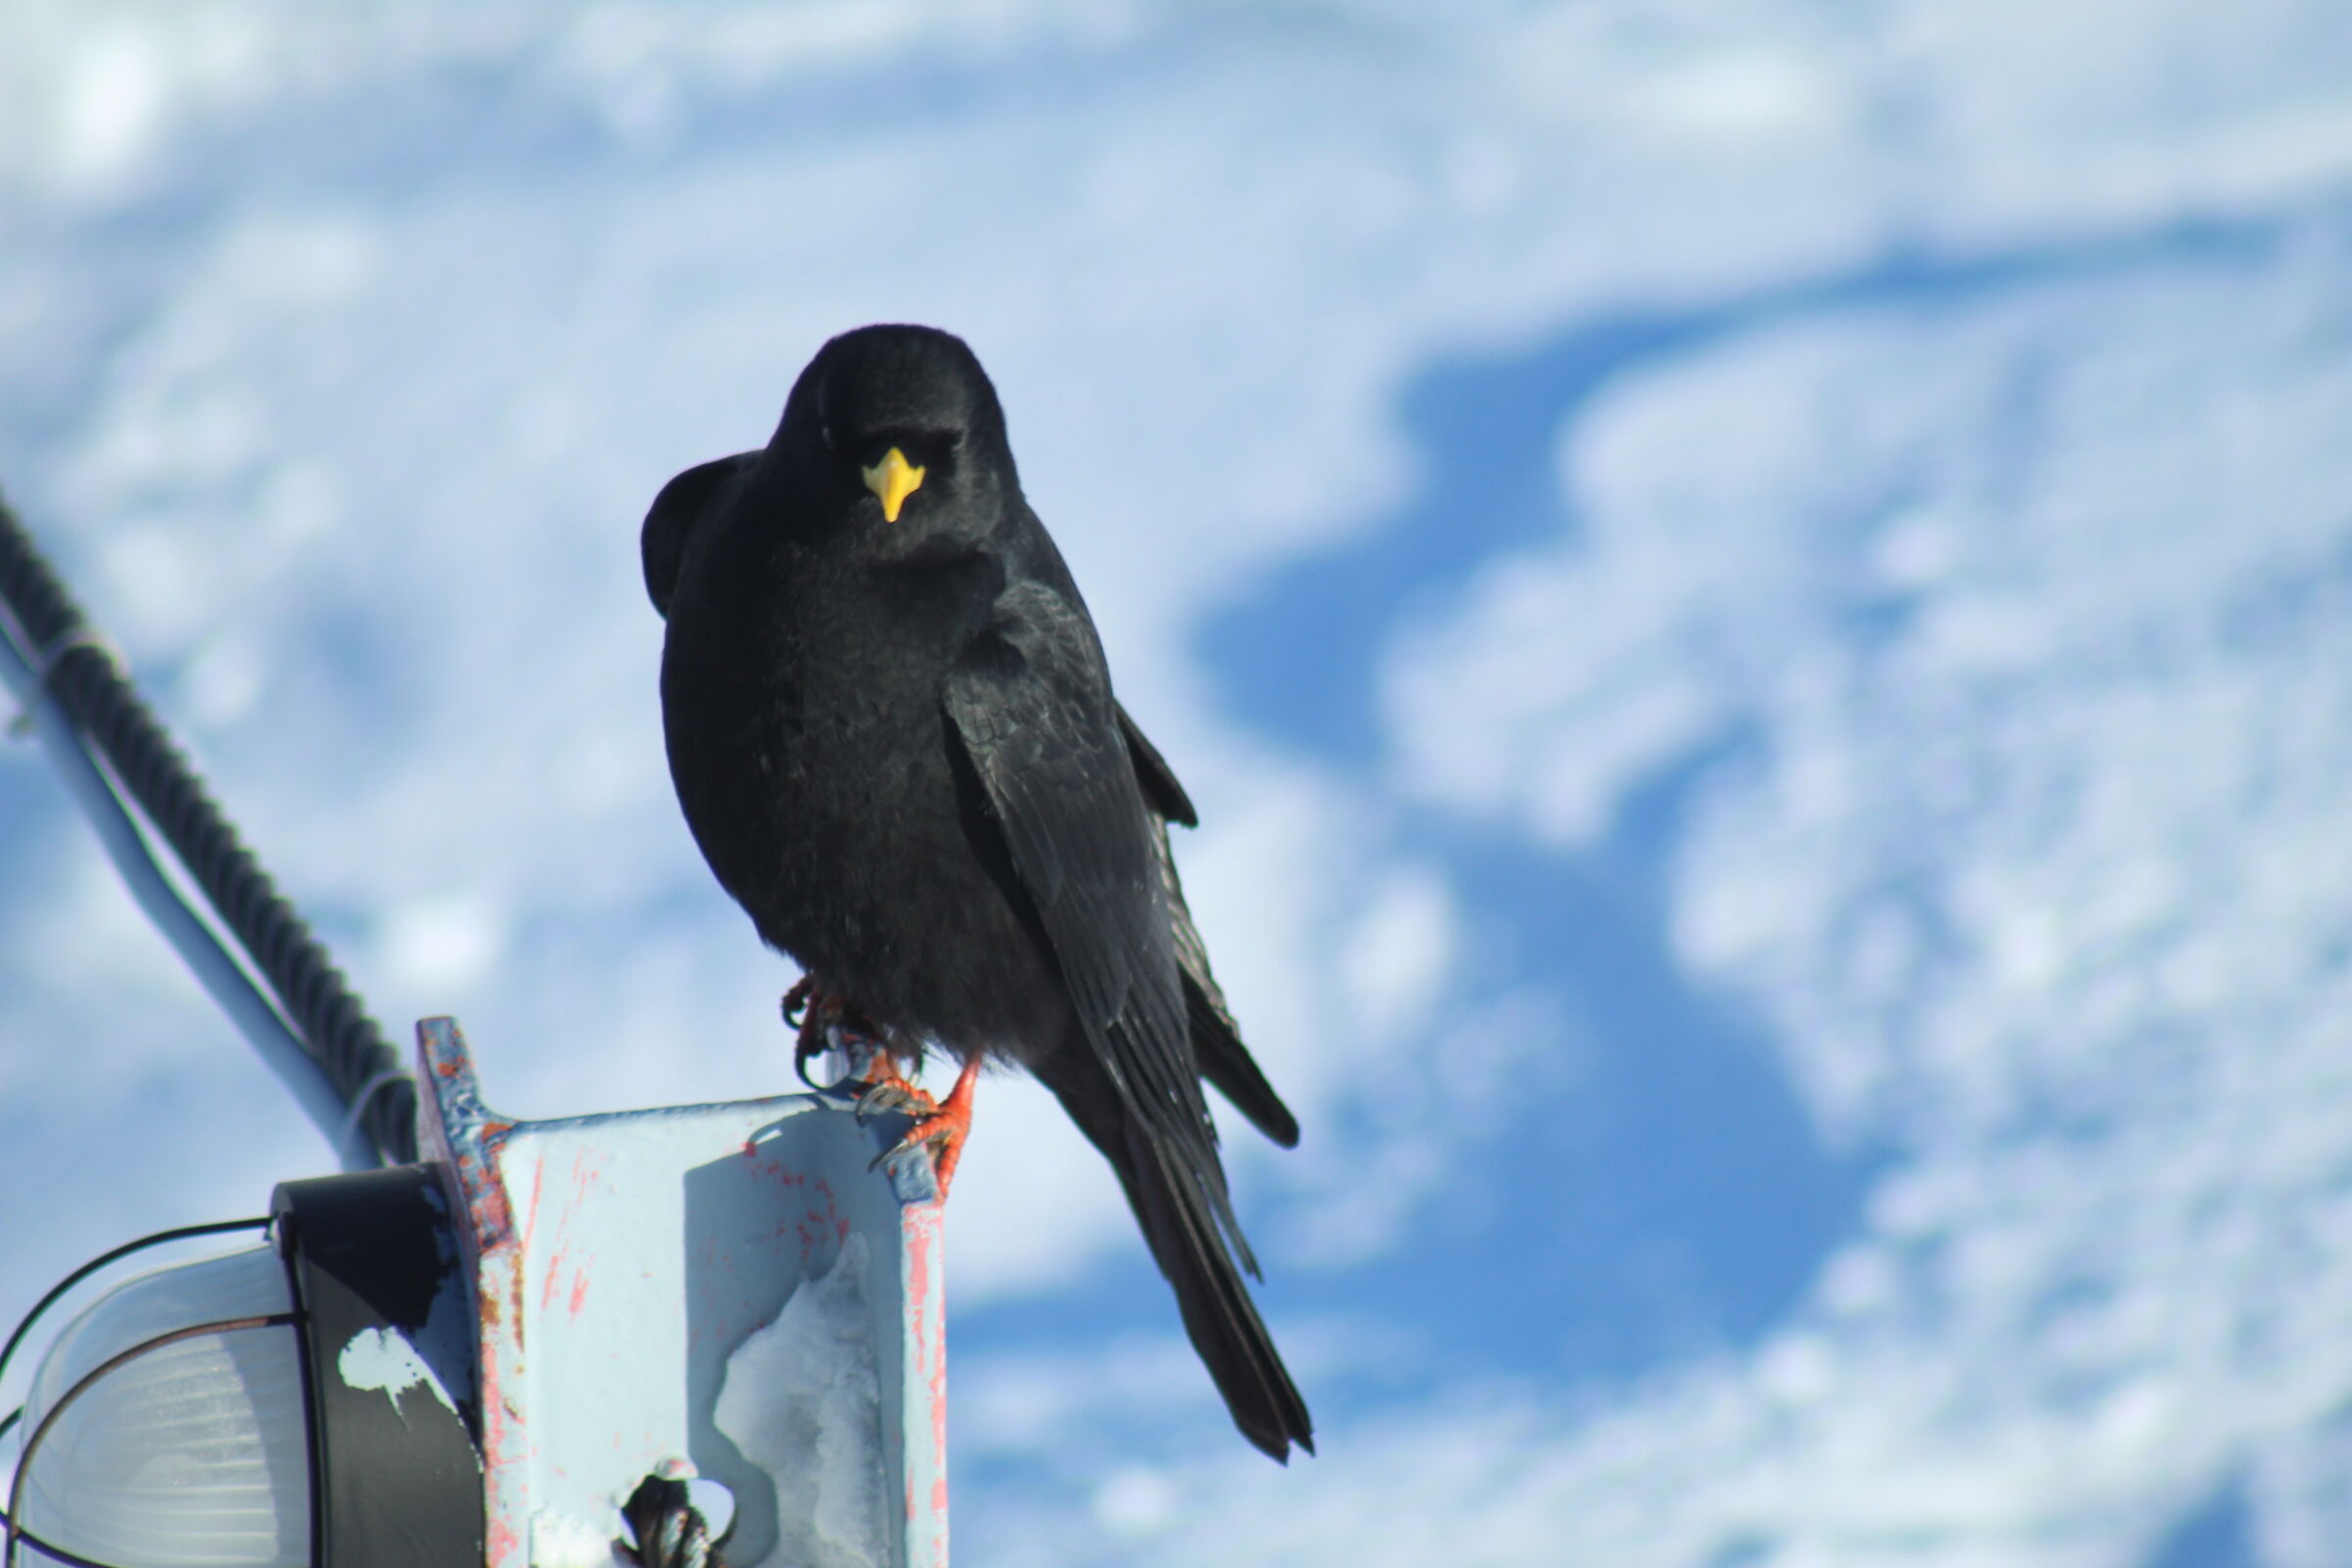 The high-altitude crow...